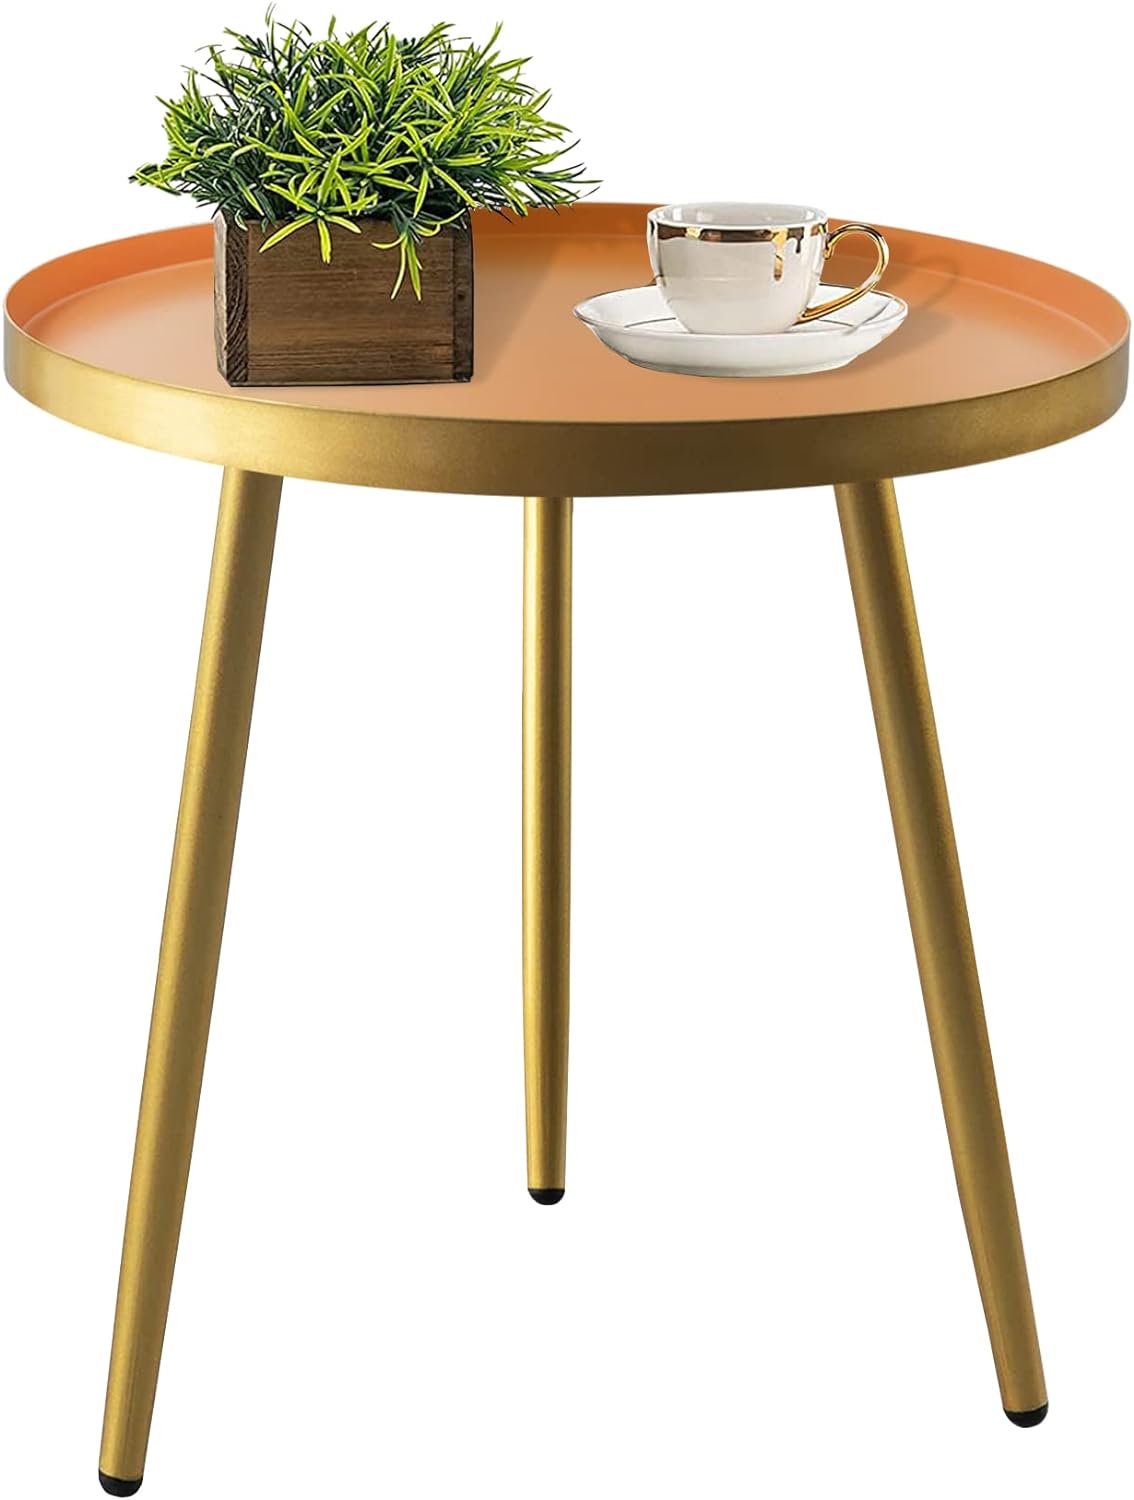 CADANI Side Table, Round Side Table Ideal for Any Room, Metal Accent Table for Small Spaces, Orange Tray with 3 Gold Legs End Table, 15.8x18.9inches